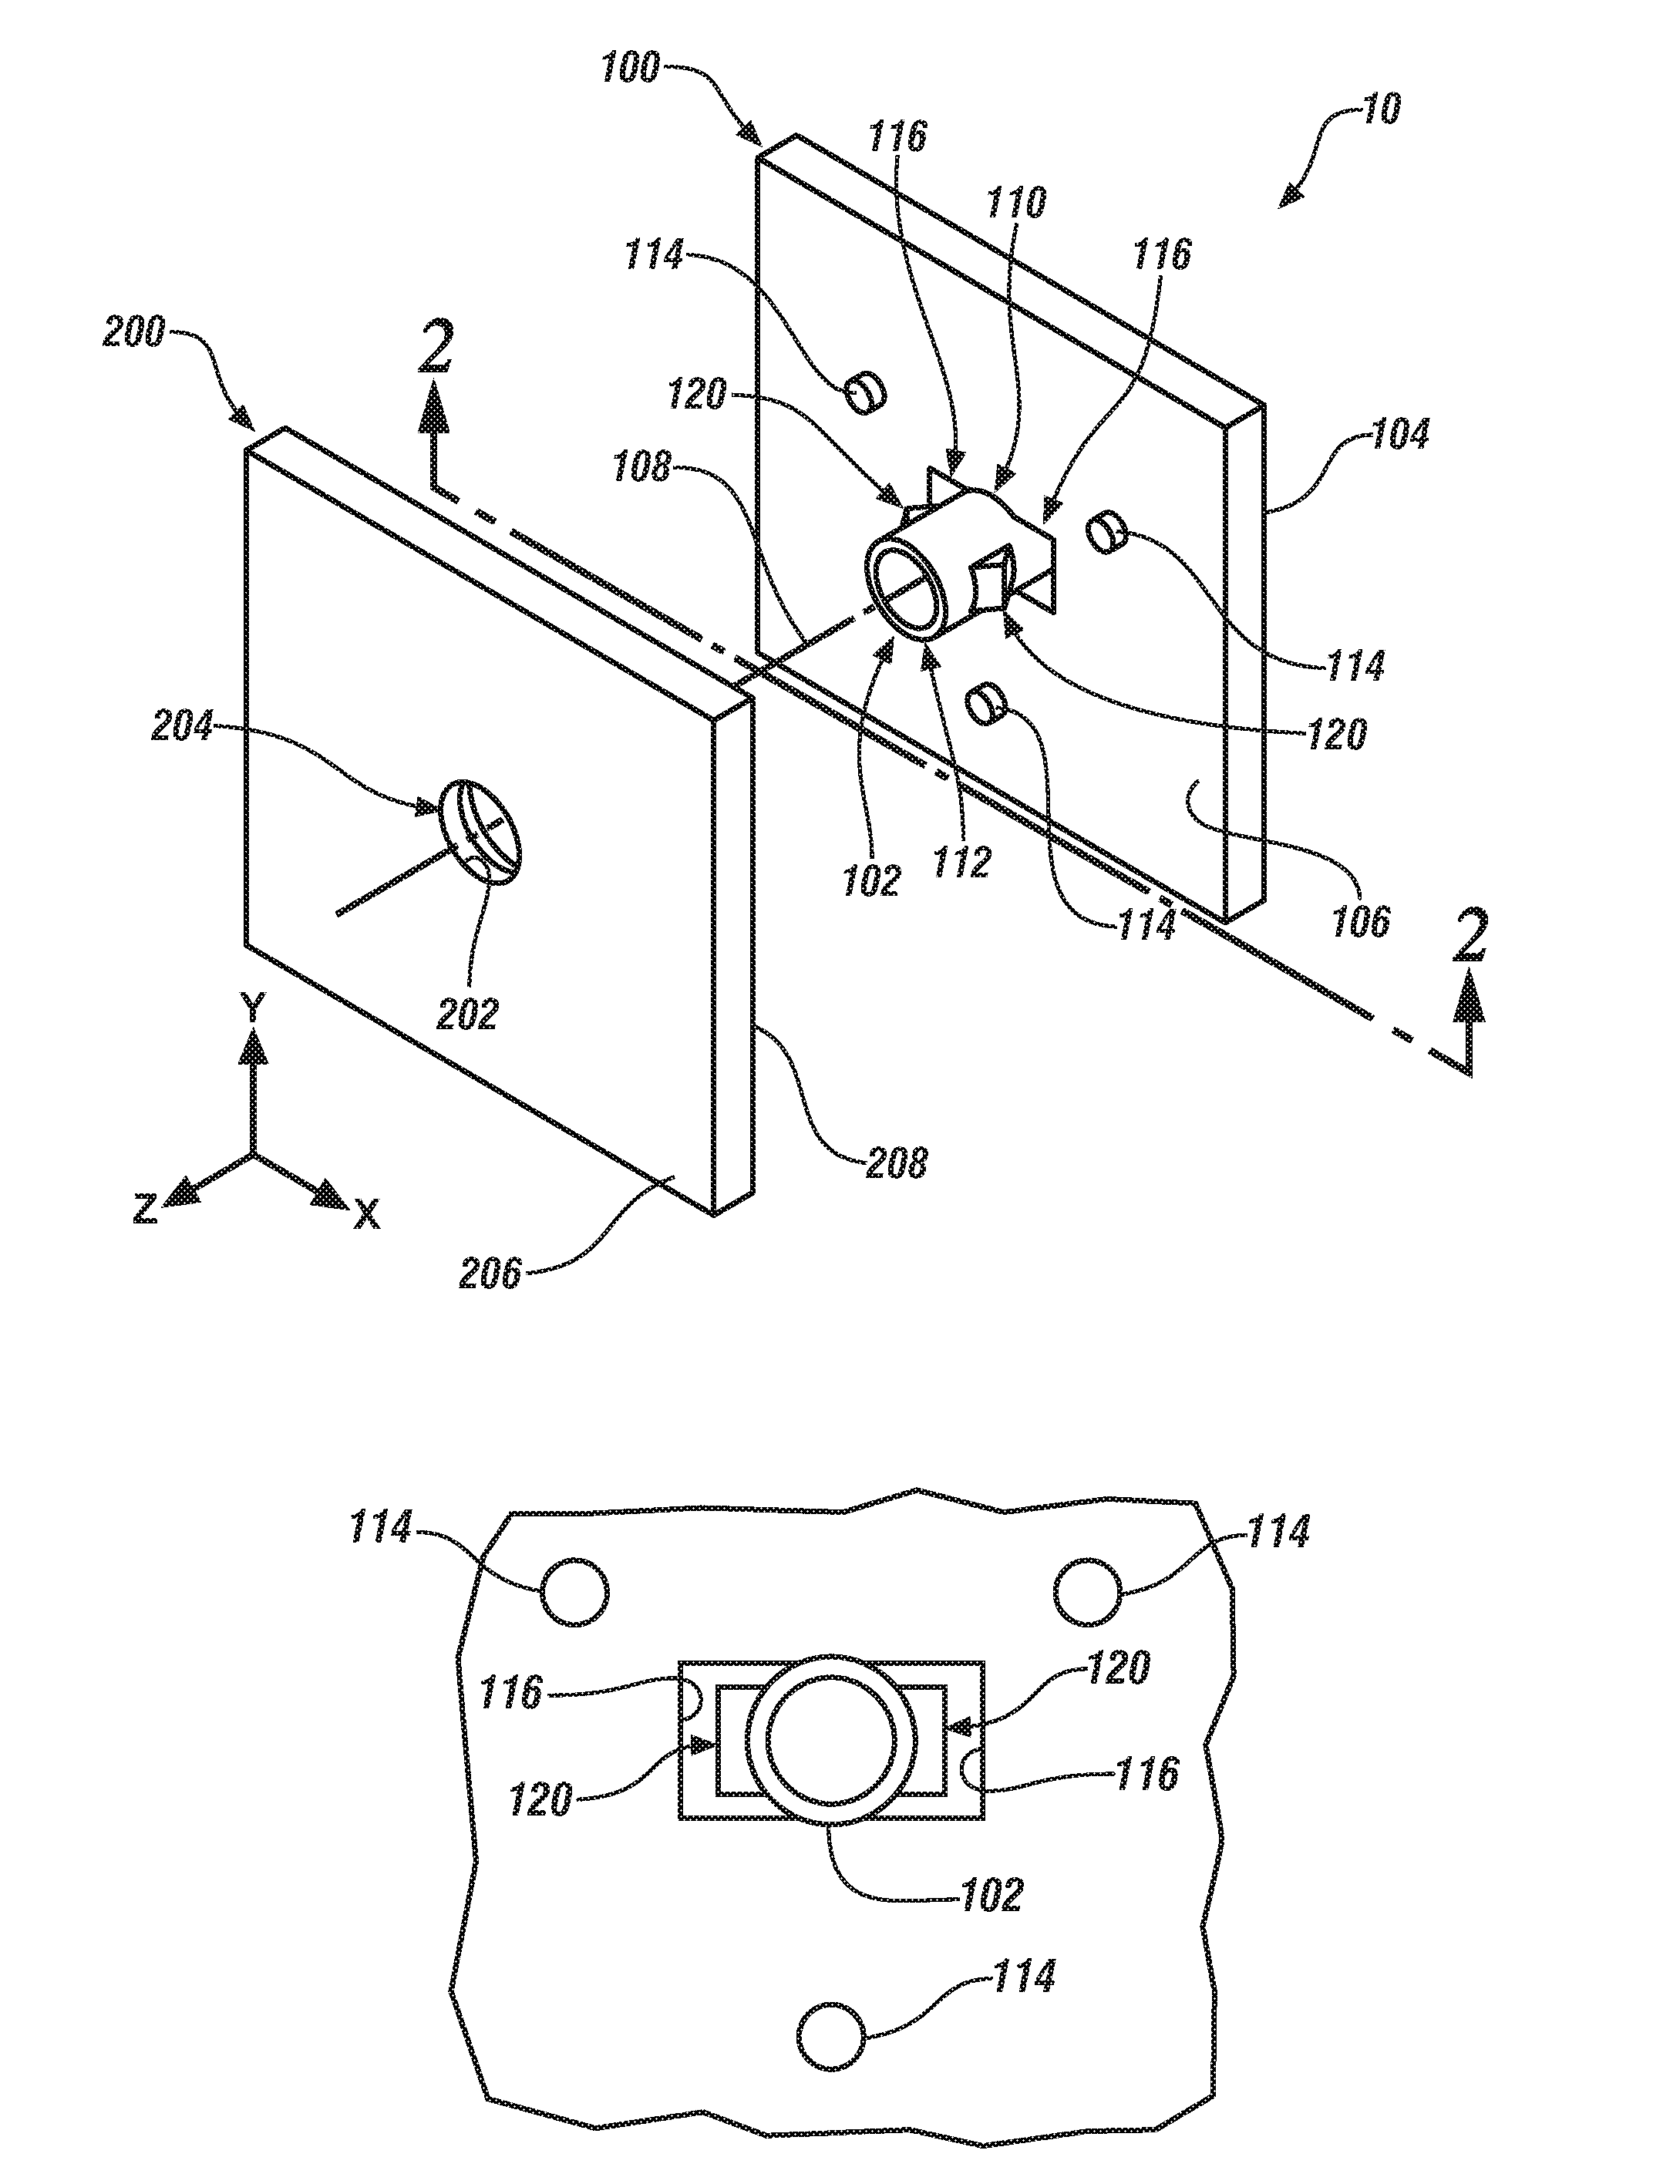 Elastically averaged alignment systems and methods